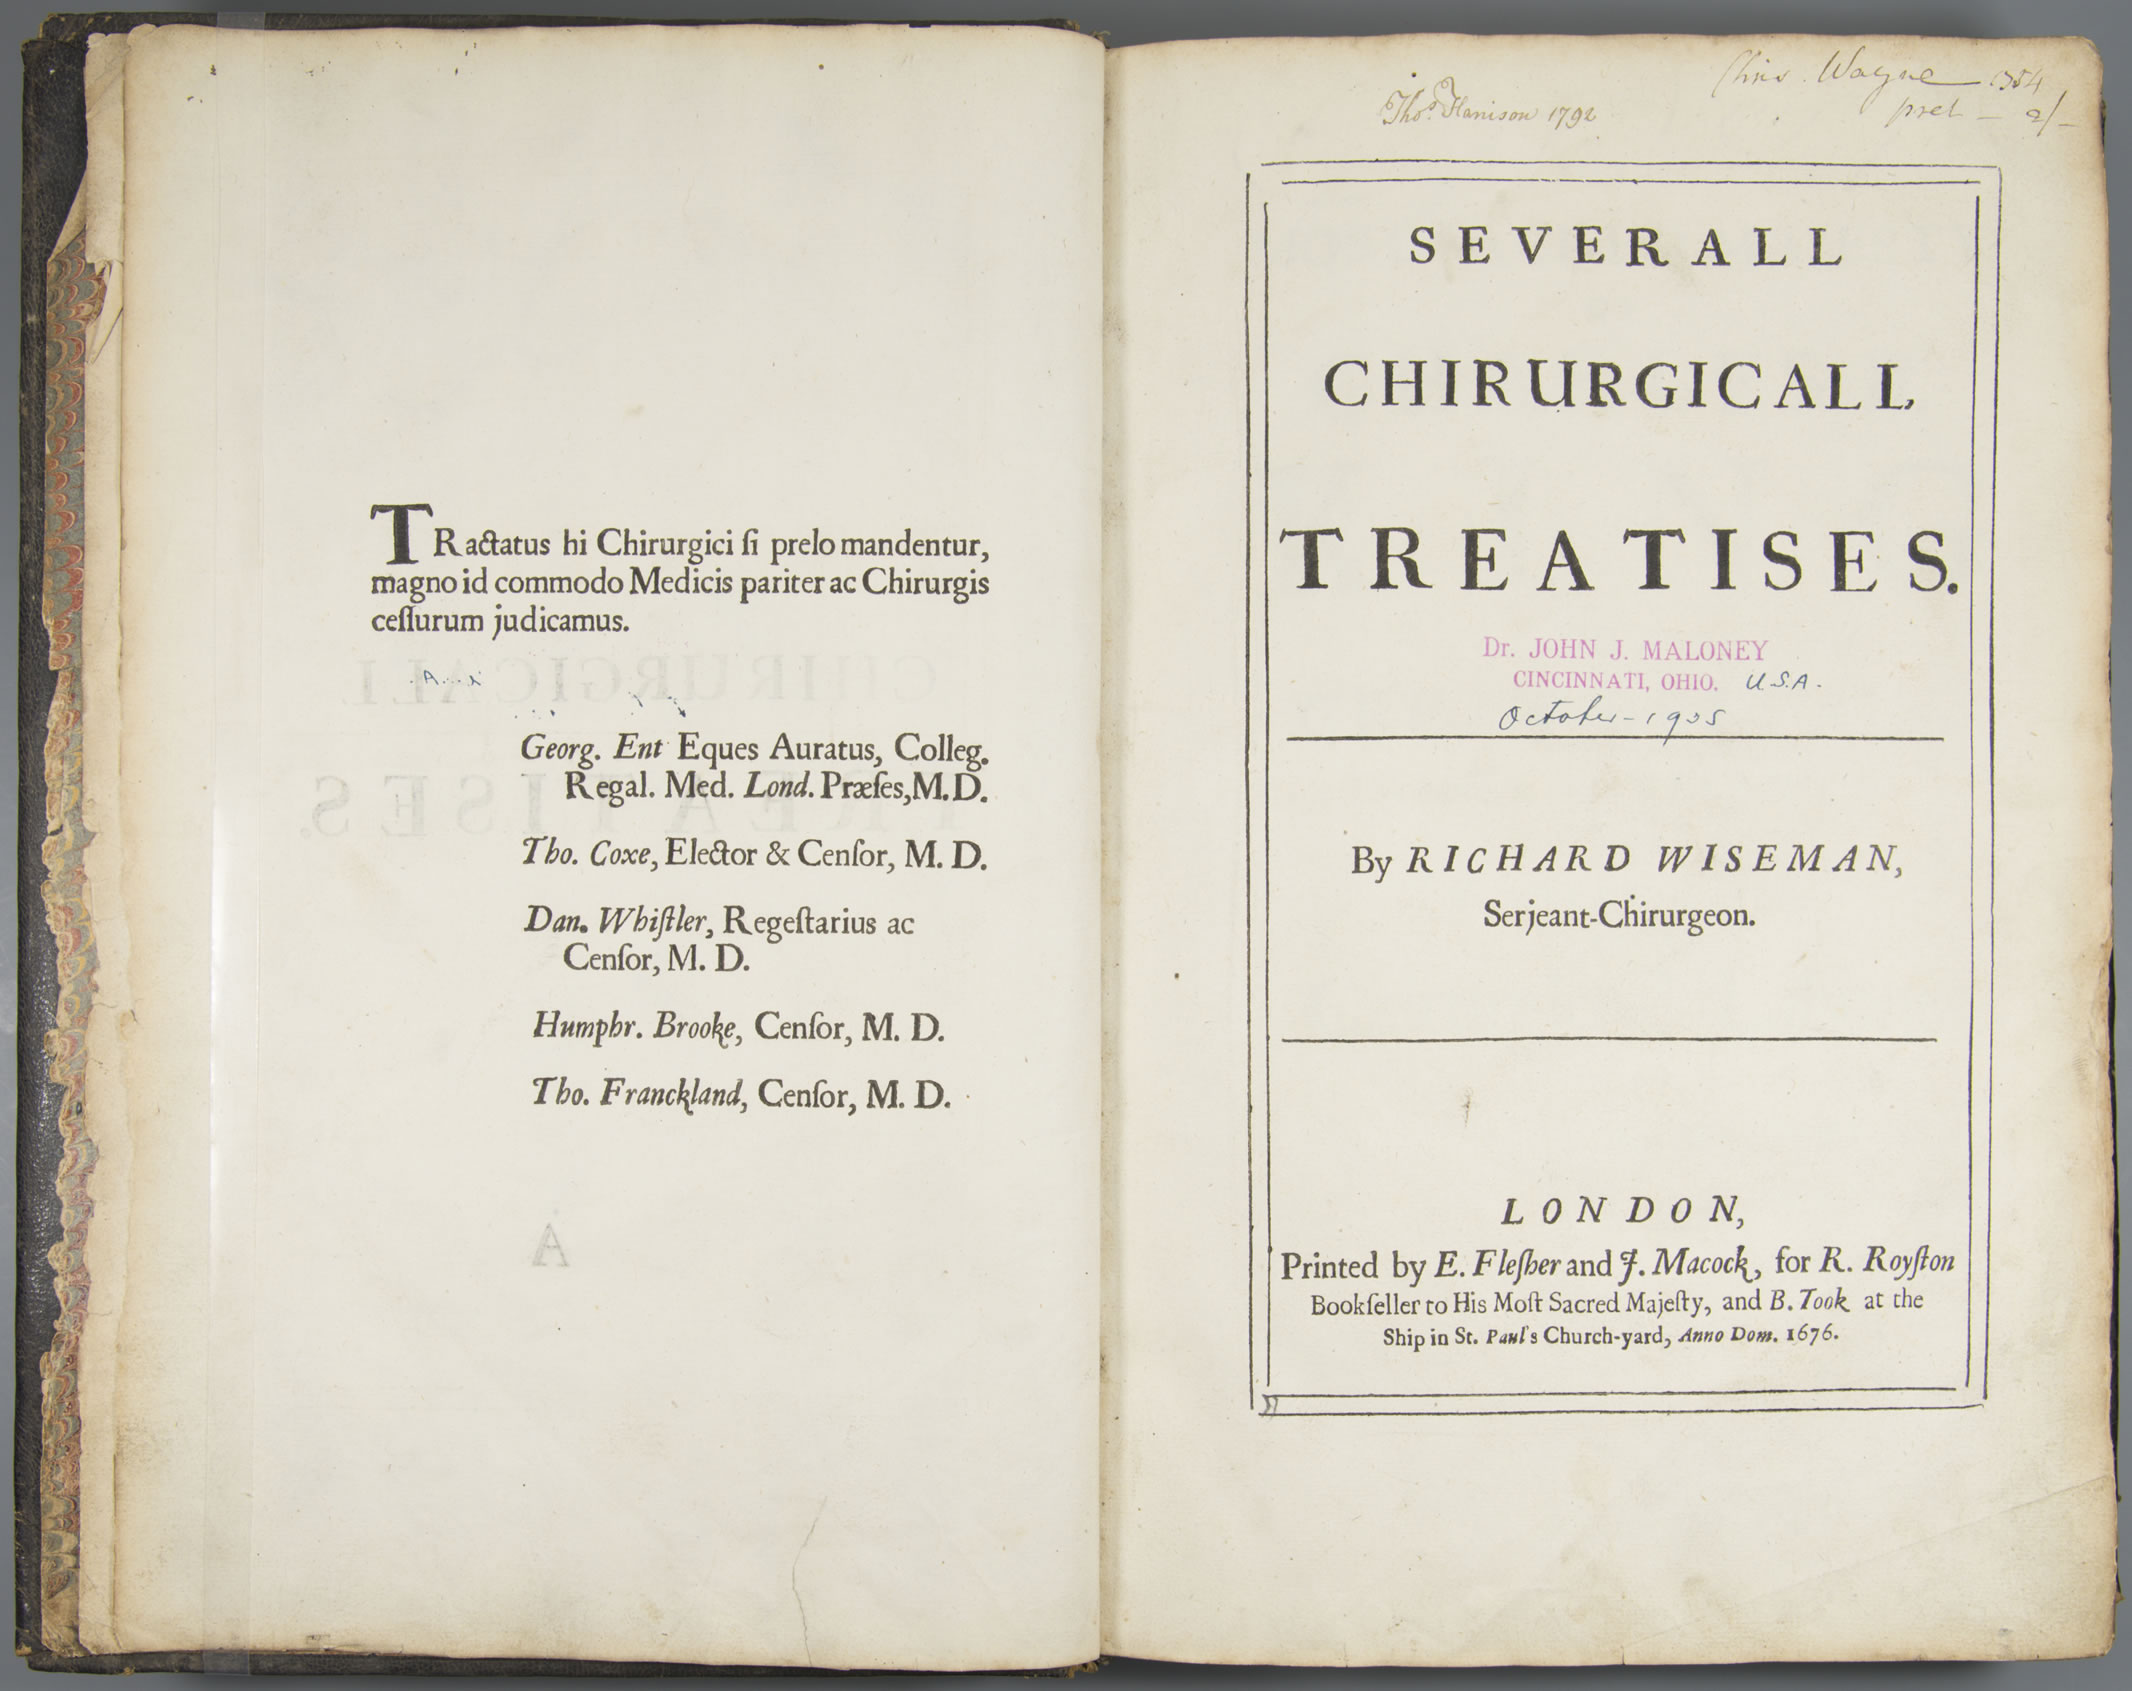 Severall chirurgicall treatises ...